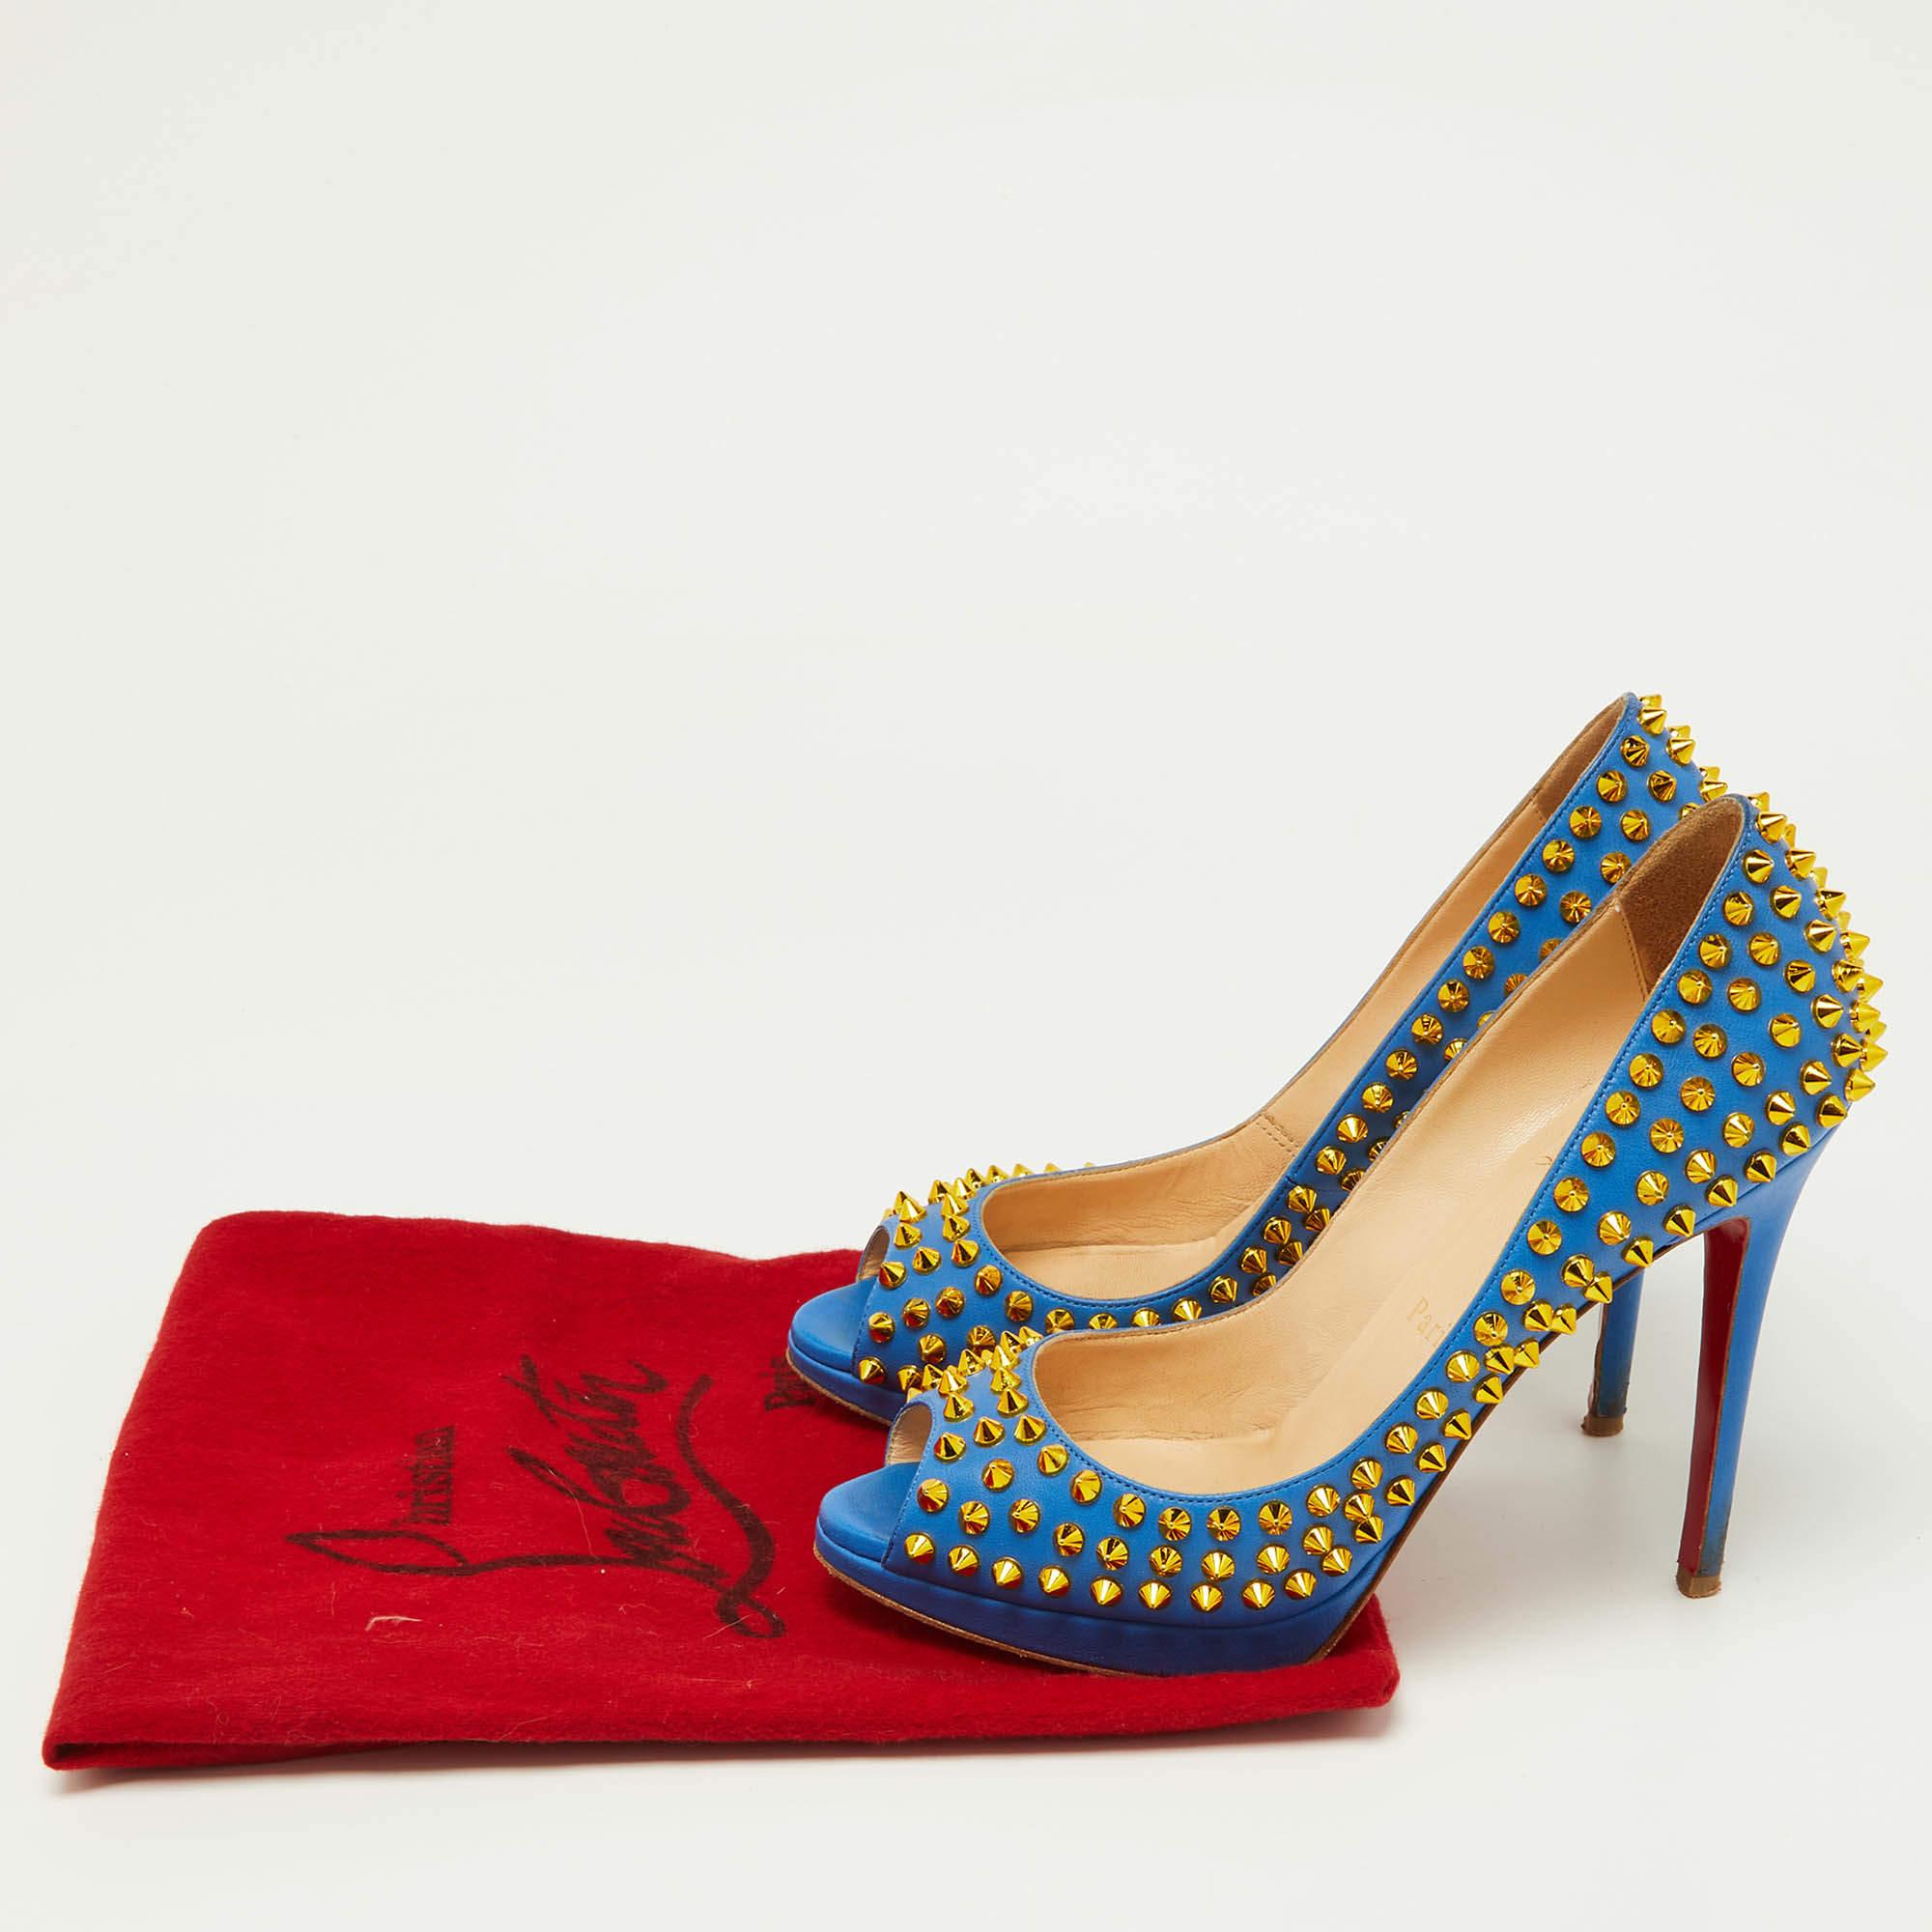 Christian Louboutin Blue Leather Yolanda Spikes Pumps Size 37.5 For Sale 5